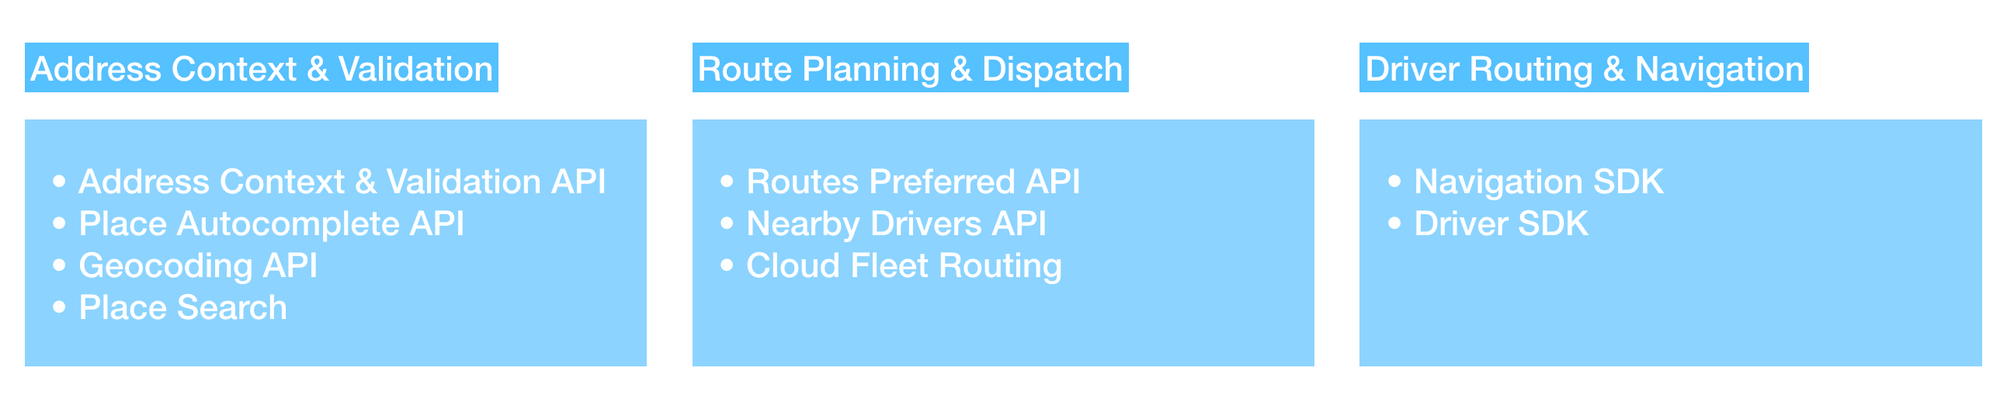 Google Mobility APIs can be used in fleet mobility solutions for address context and validation, route planning and dispatch as well as driver routing and navigation